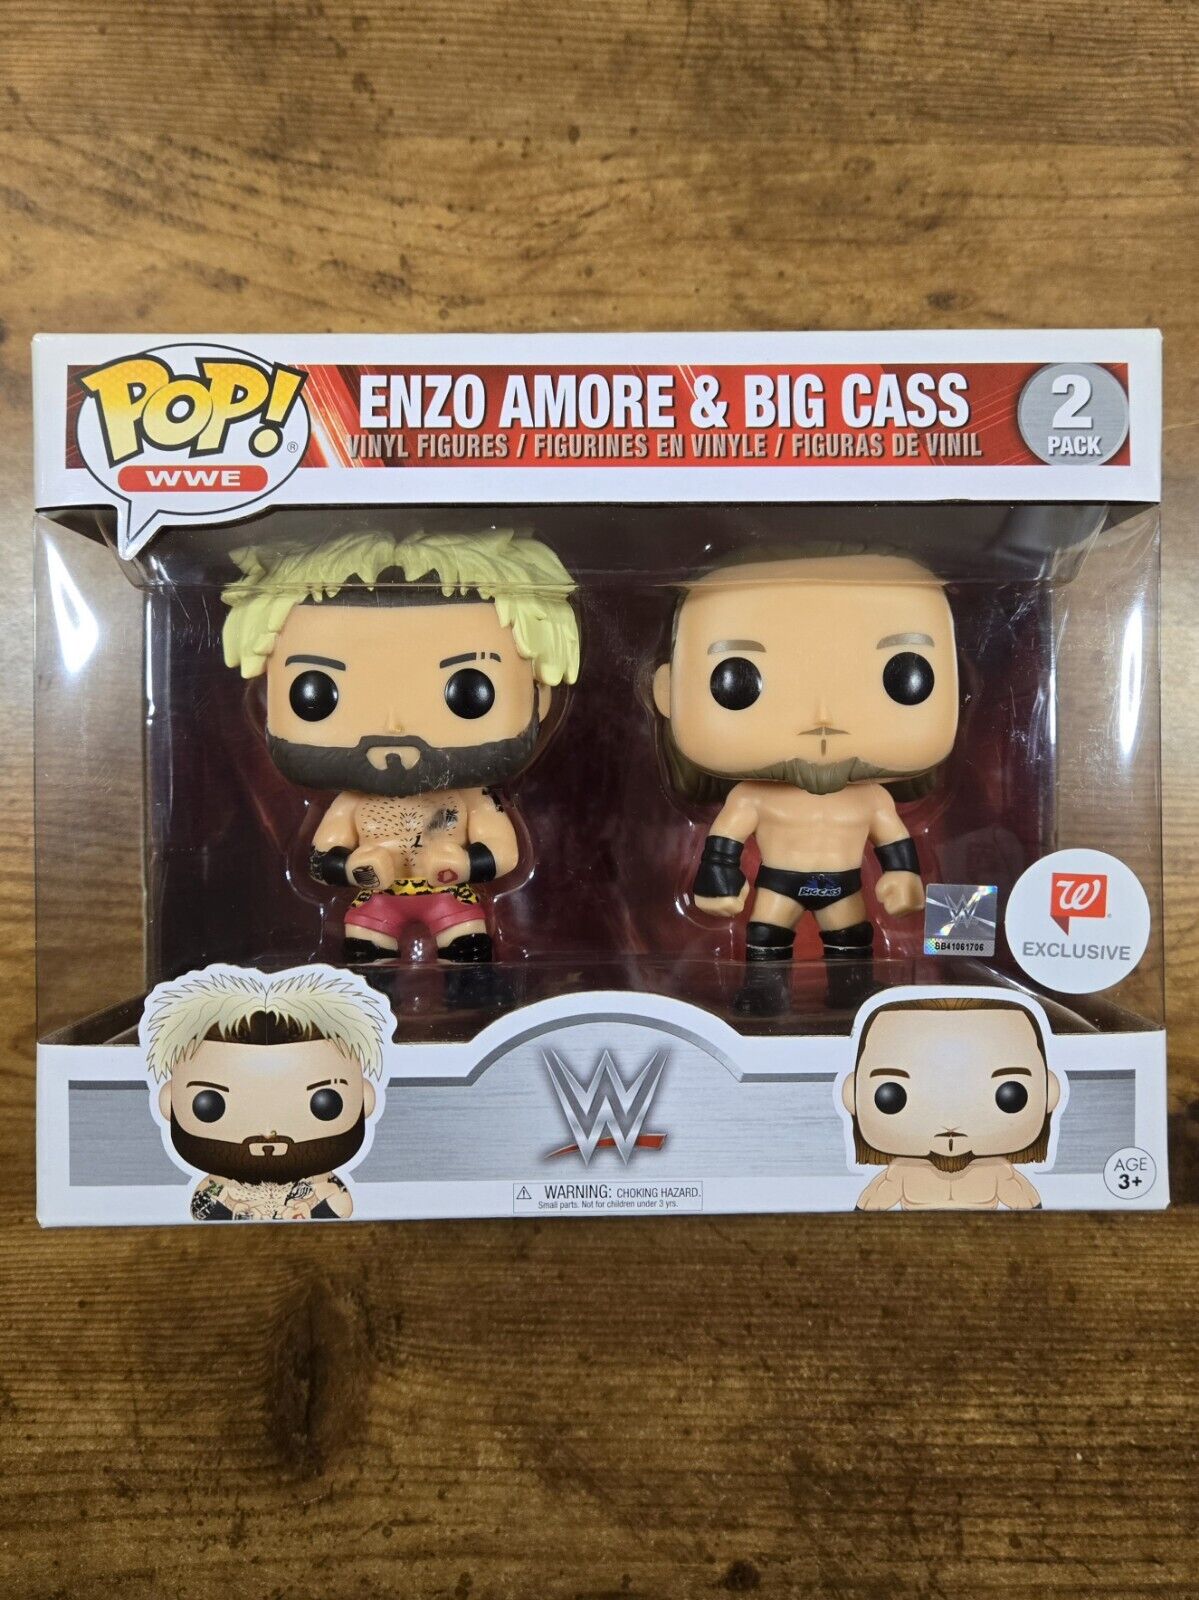 VAULTED Funko POP 2-Pack WWE Enzo Amore & Big Cass, 2017 Excl In Protector, New